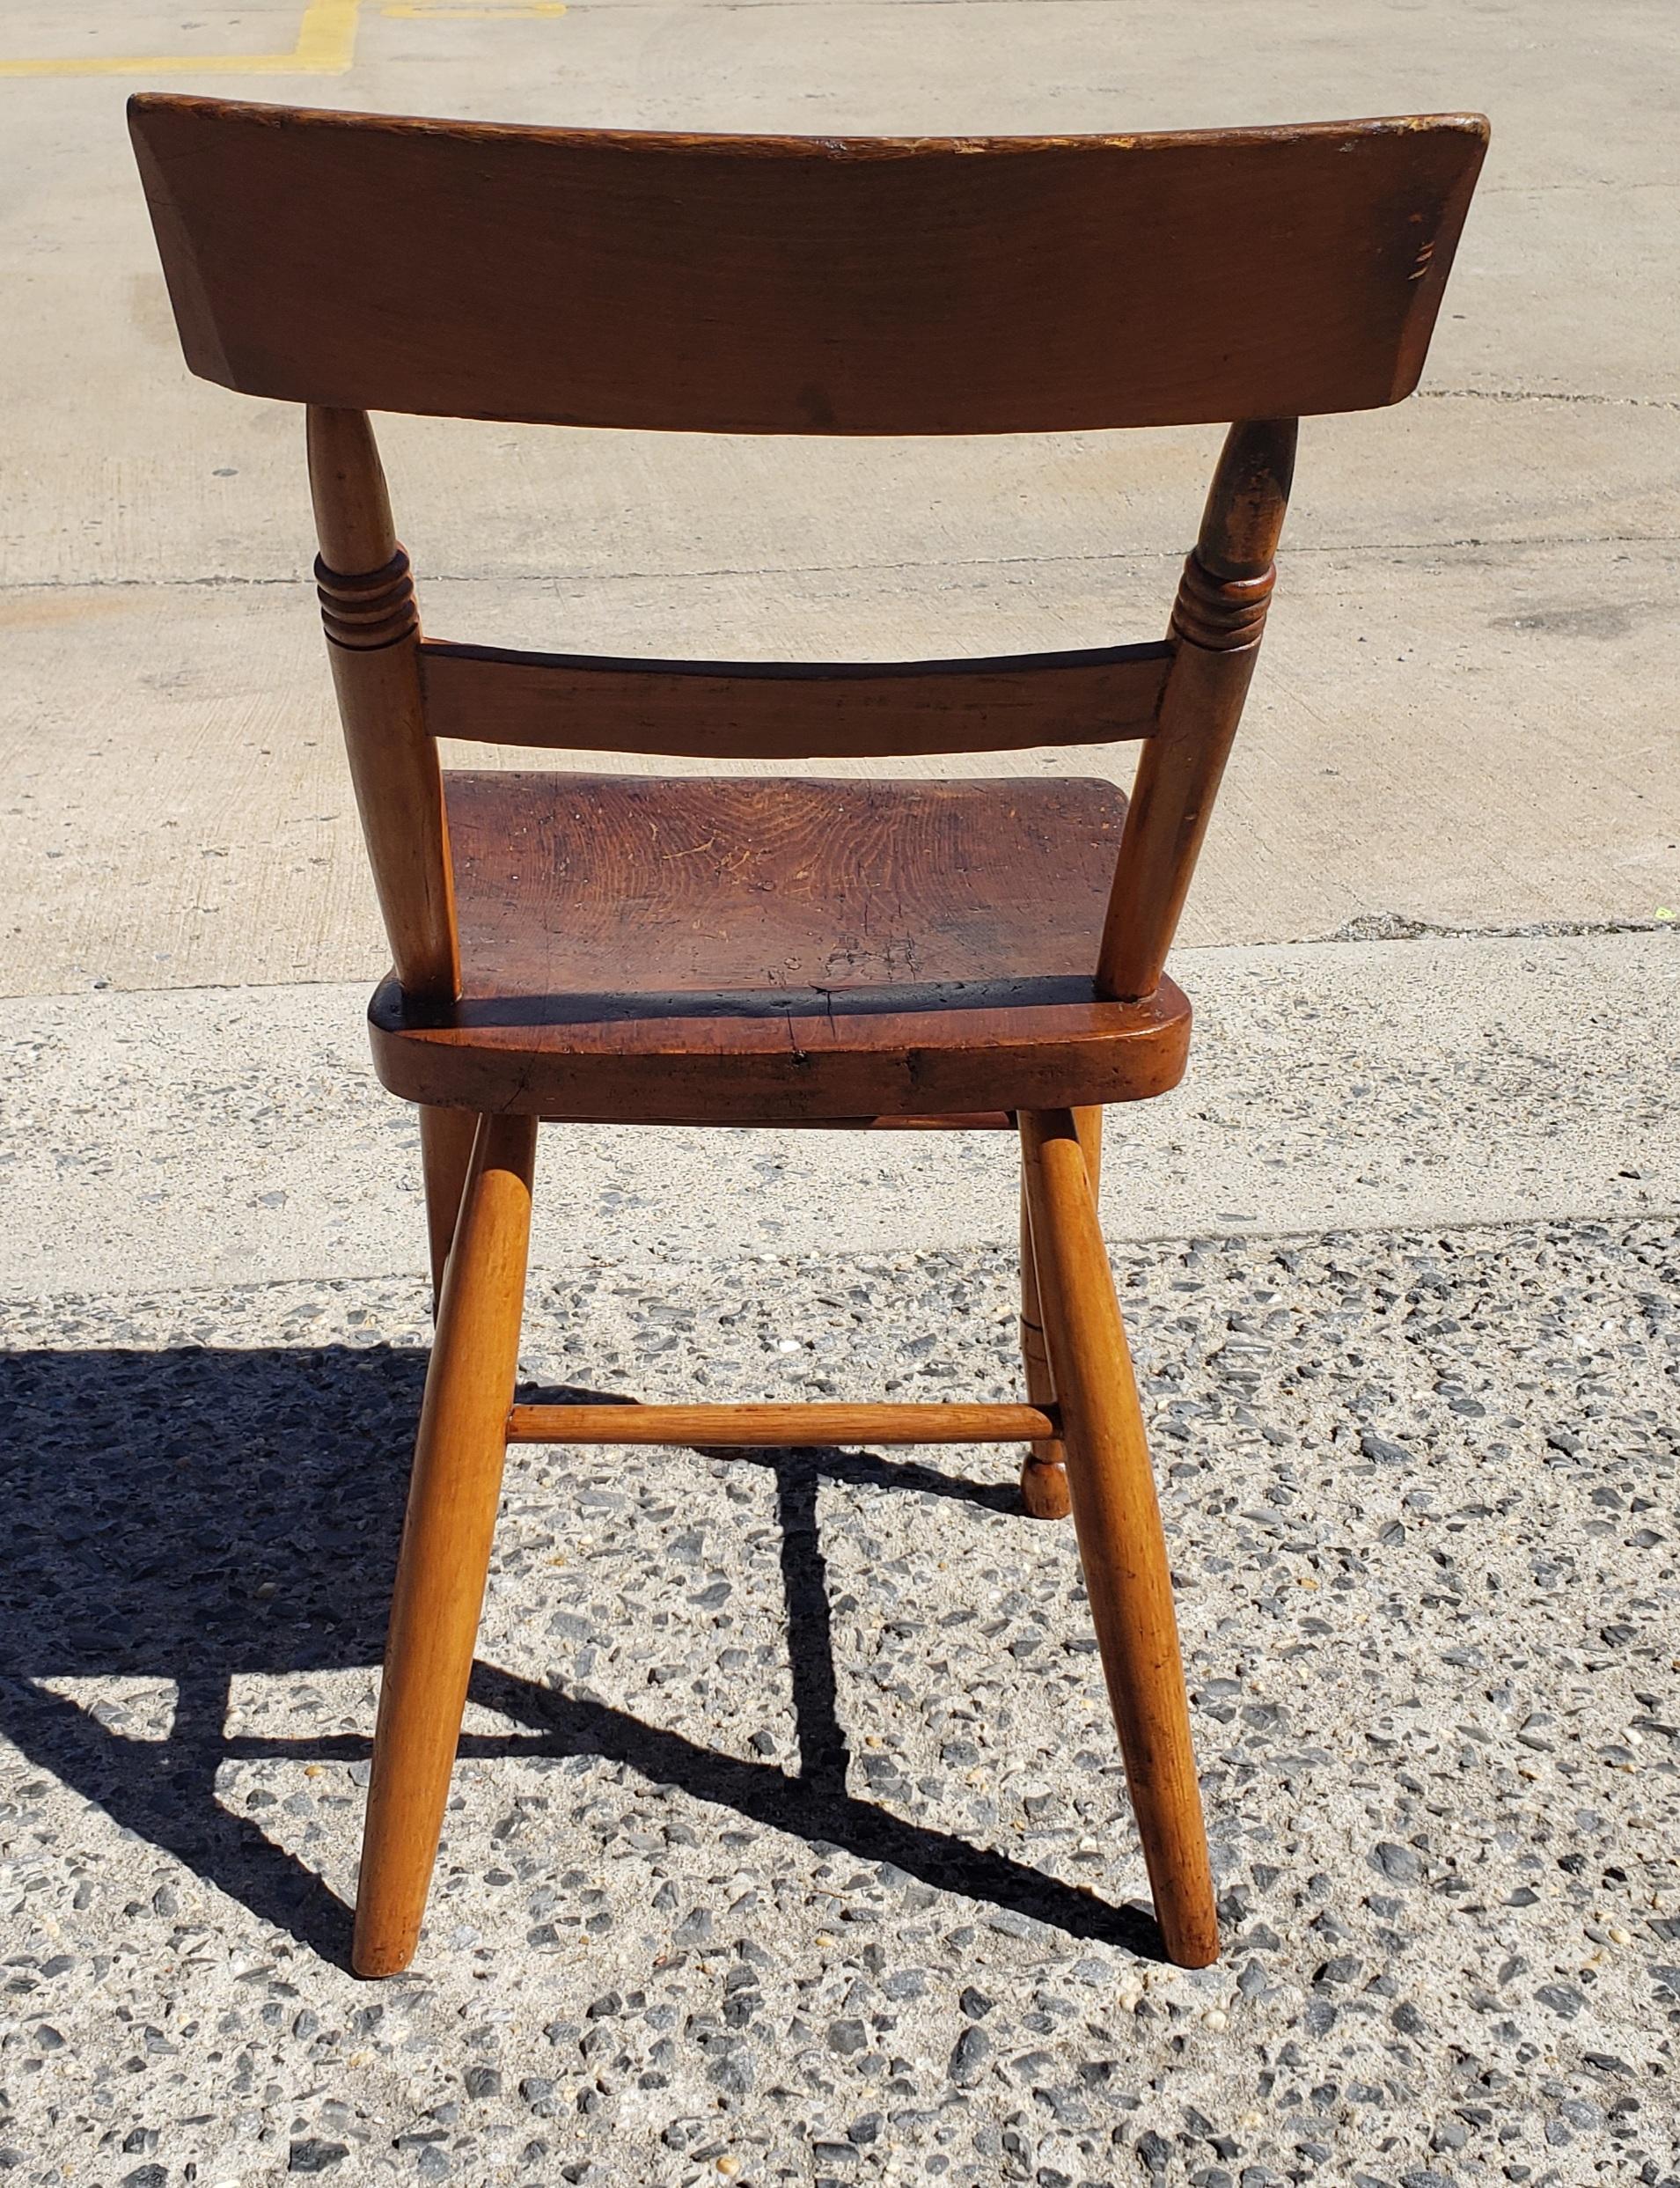 Hand-Crafted 19th Century Early American Plank Side Chair